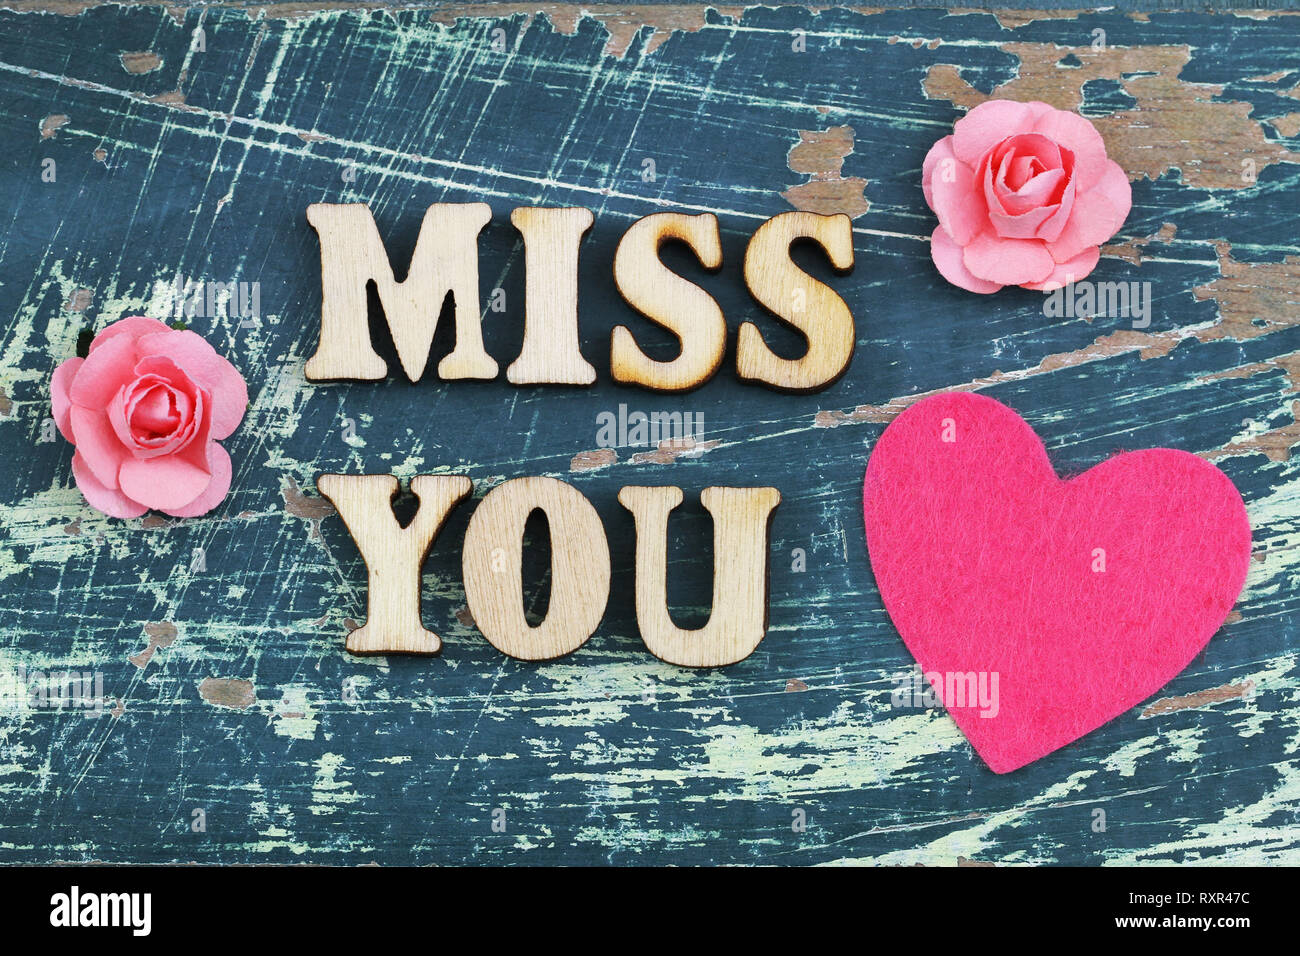 Miss you written with wooden letters on rustic surface Stock Photo